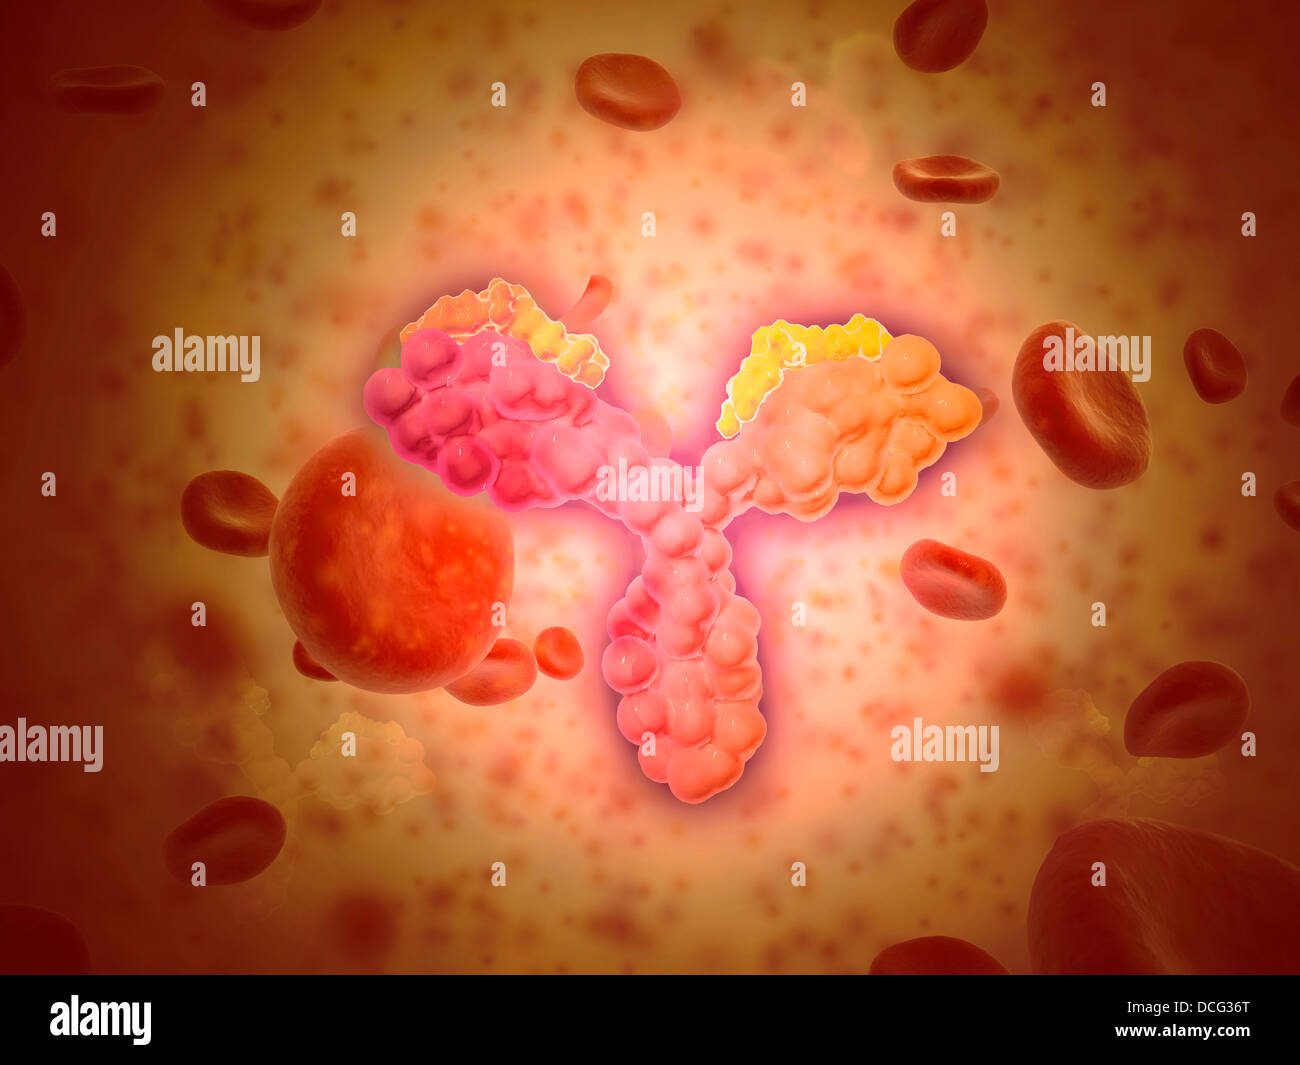 Microscopic view of human anitbodies with red blood cells. Stock Photo